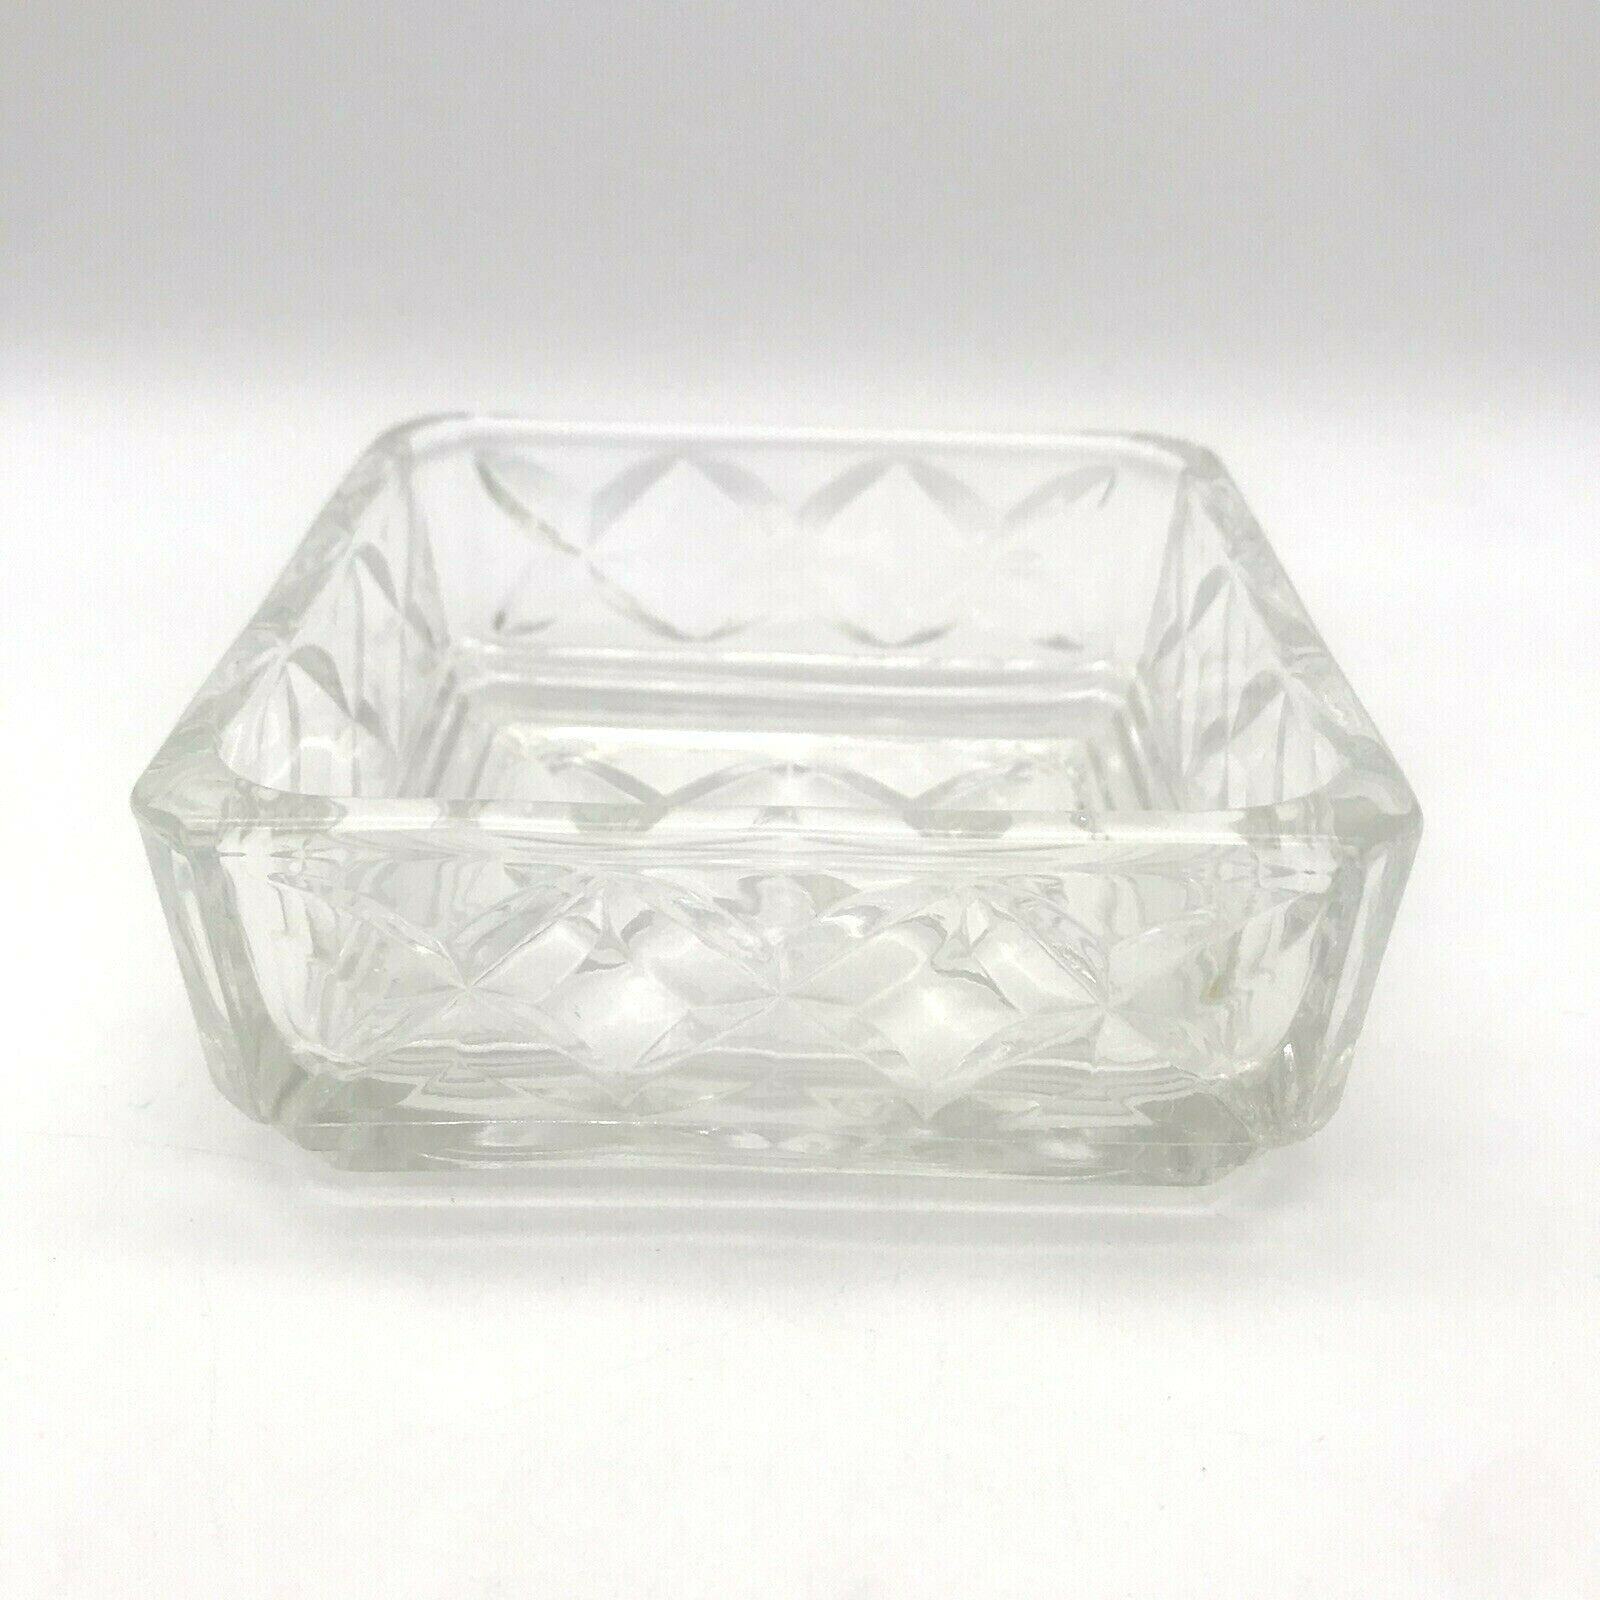 Vintage Heavy Cut Glass Clear Square Candy Nut Trinket Dish Bowl 4 1/4"